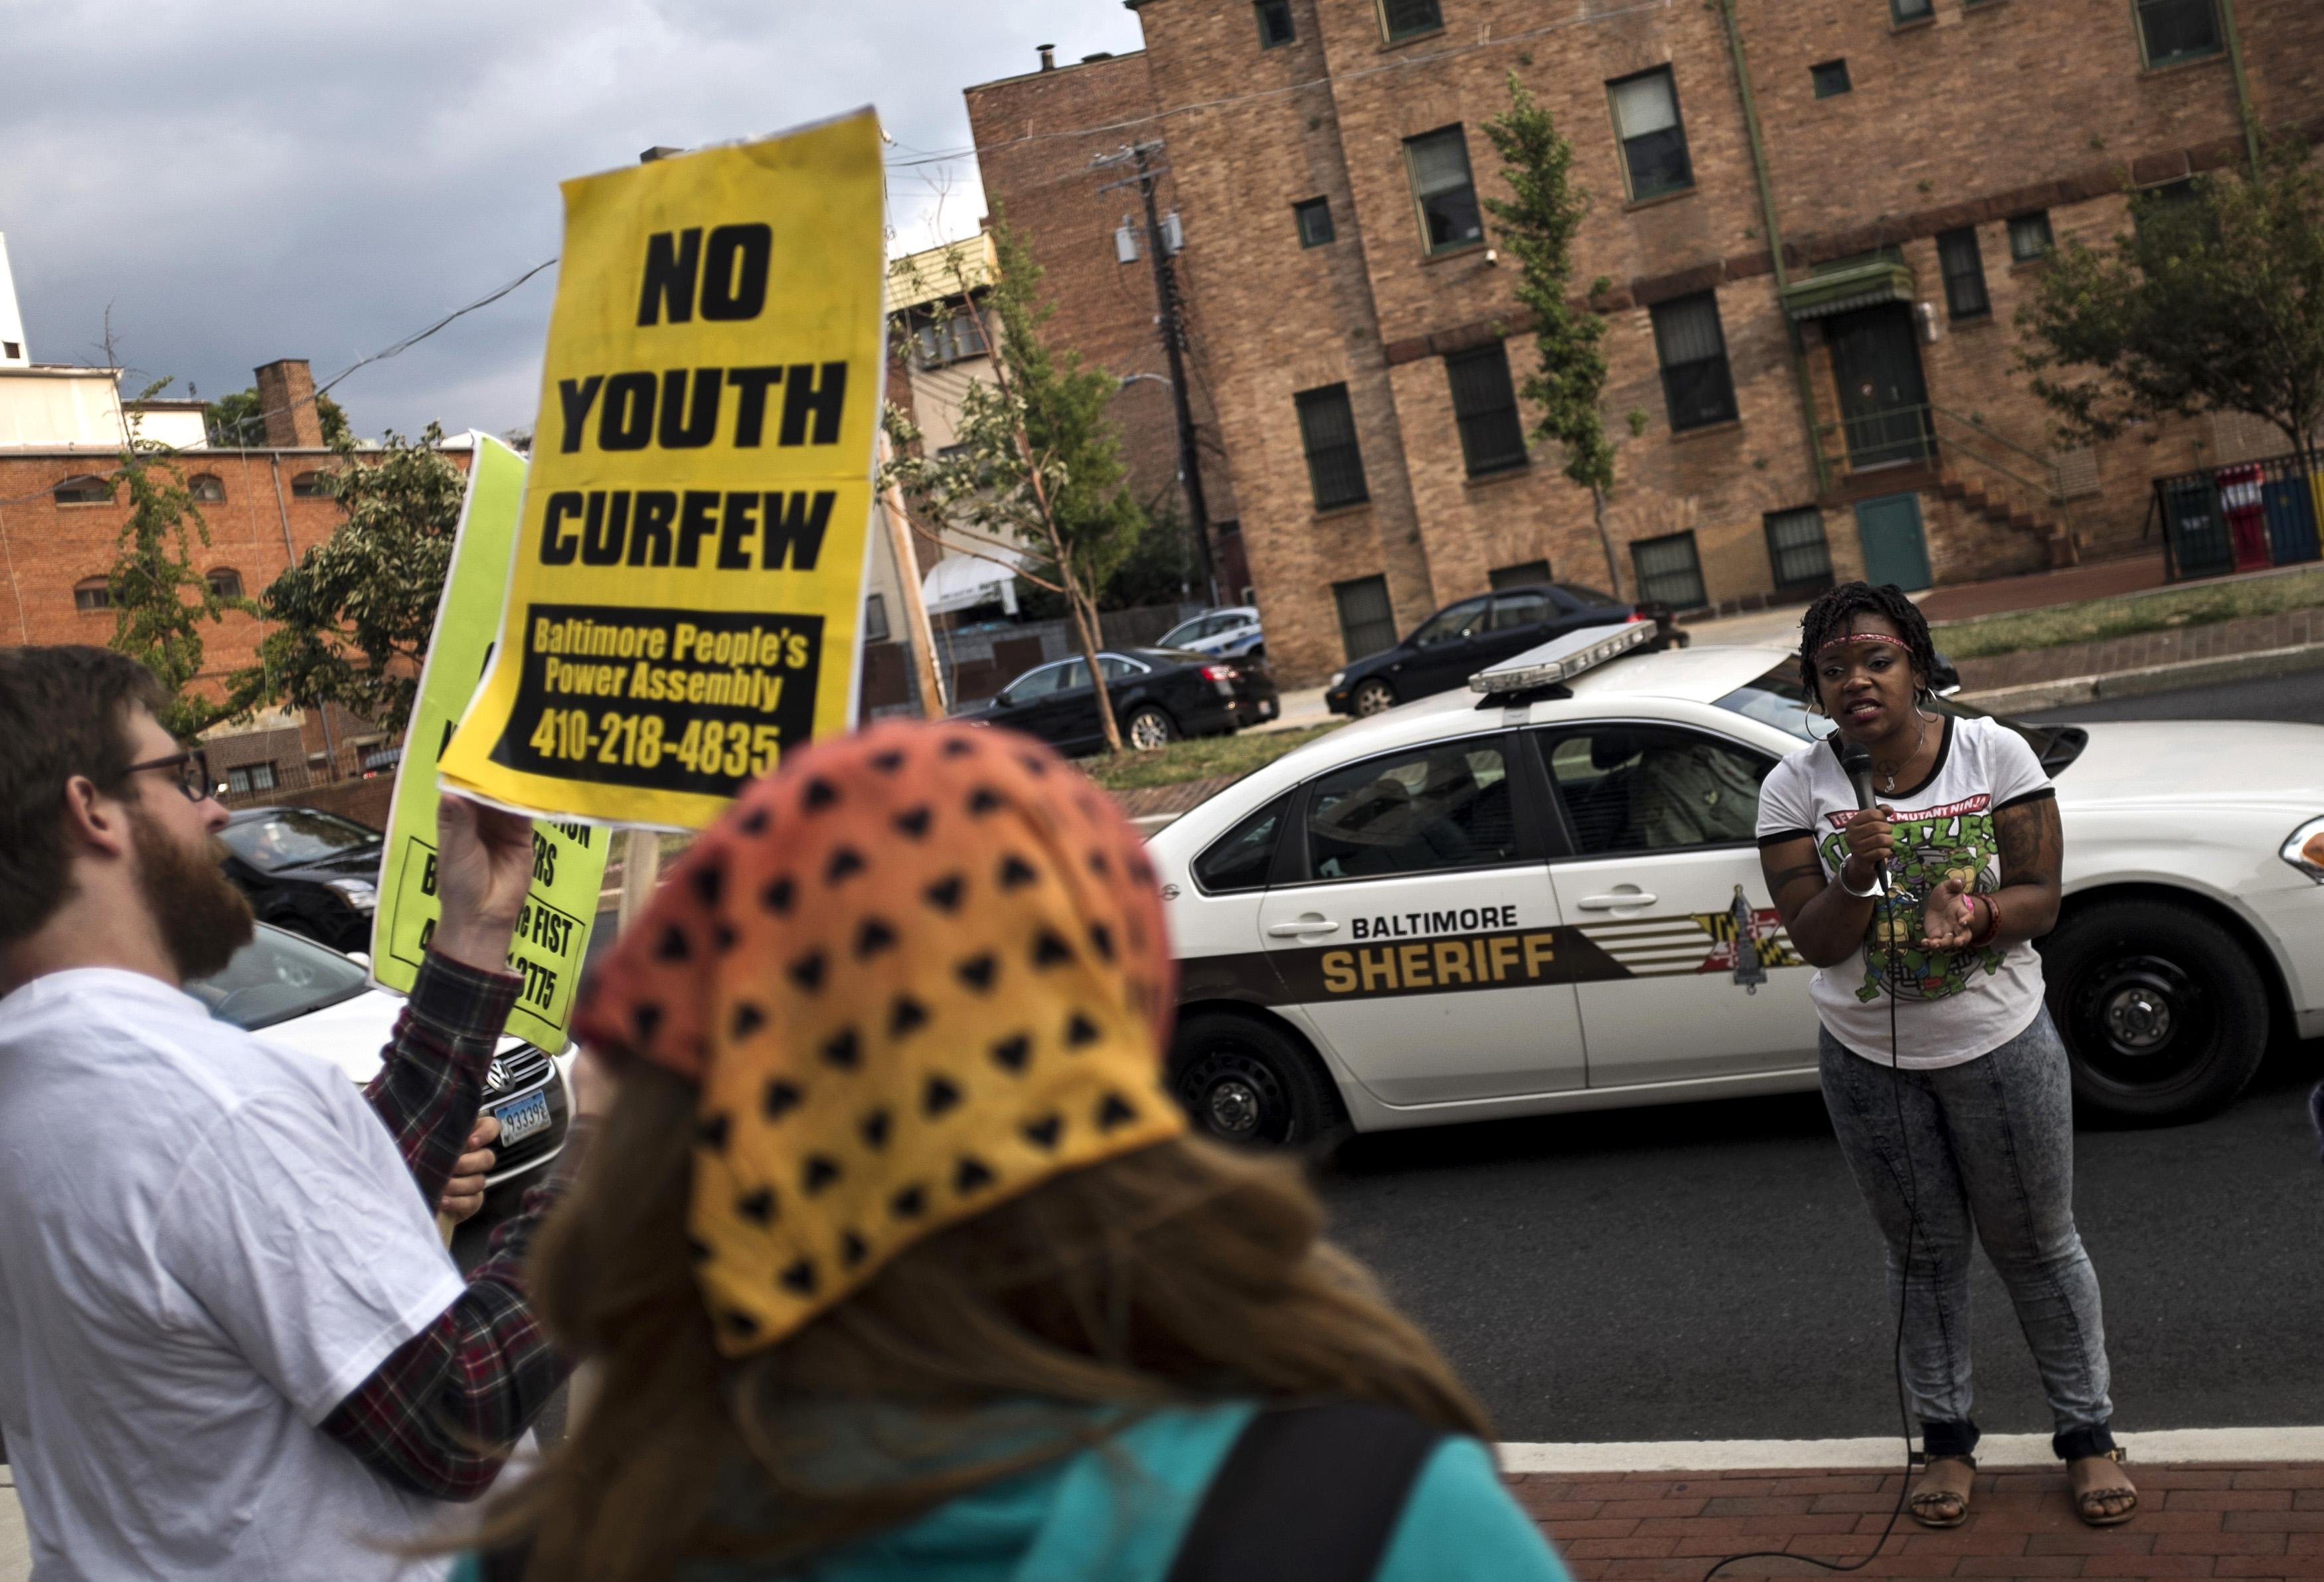 Protesters demonstrate before community meeting with city officials about new youth curfew legislation in Baltimore